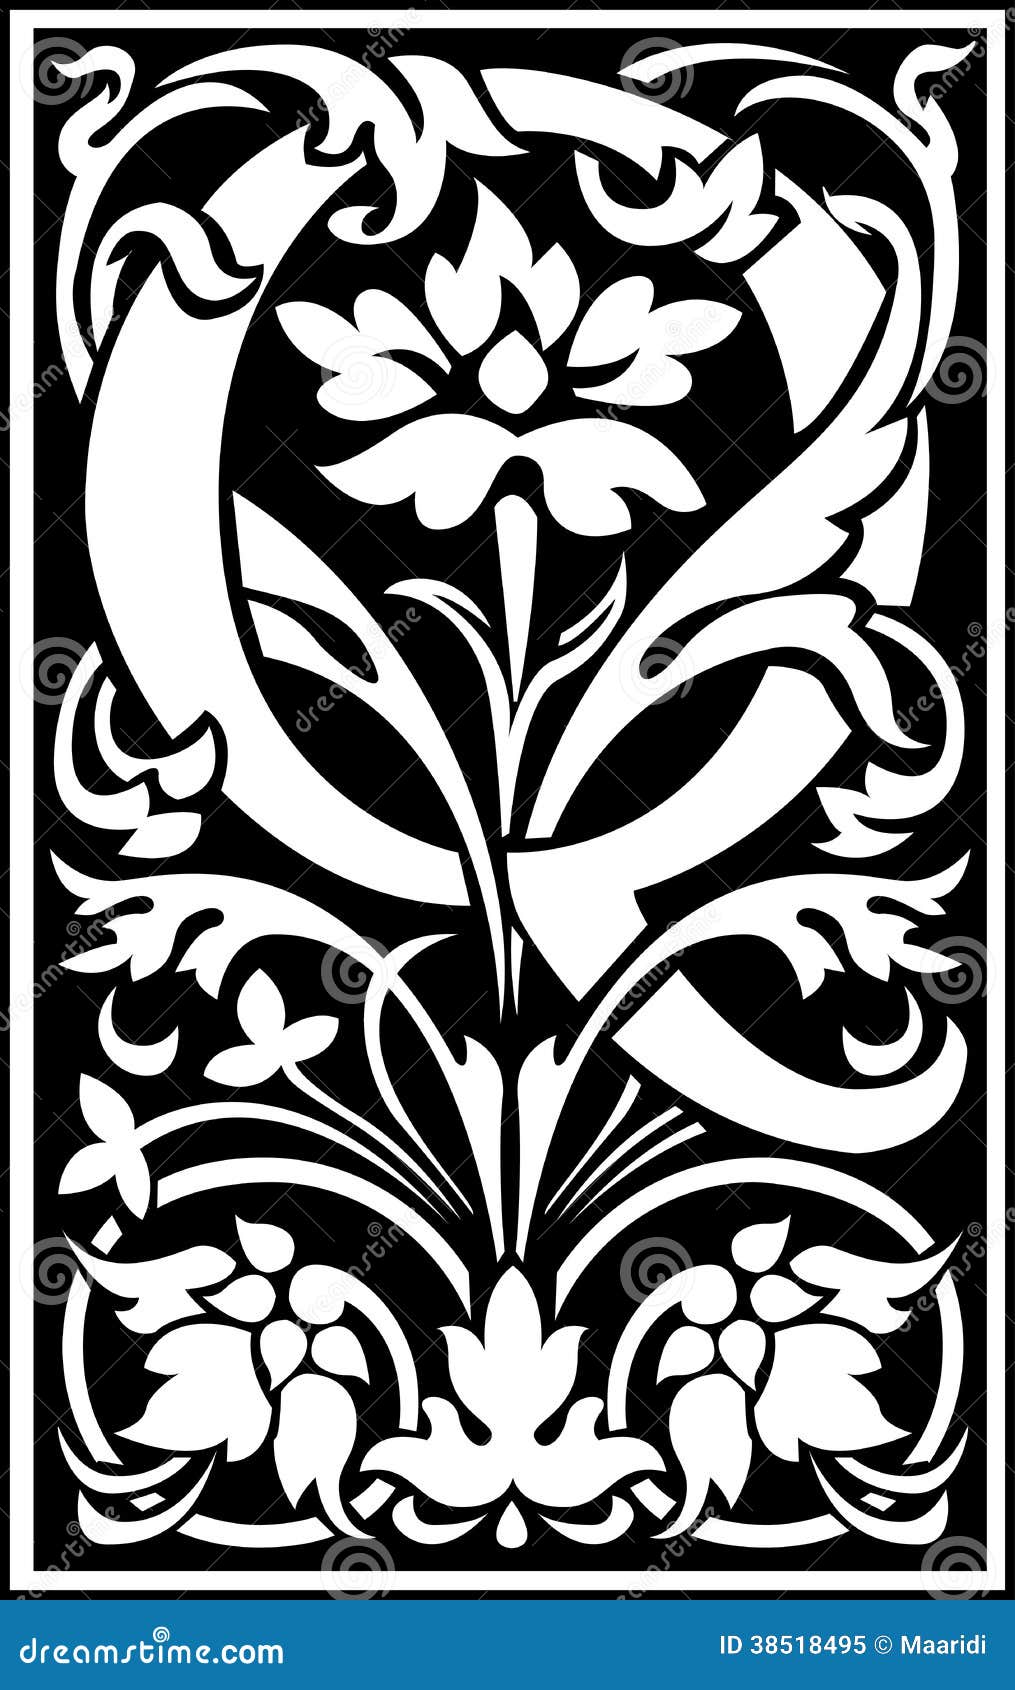 Flowers Decorative Letter Q Balck And White Stock Vector